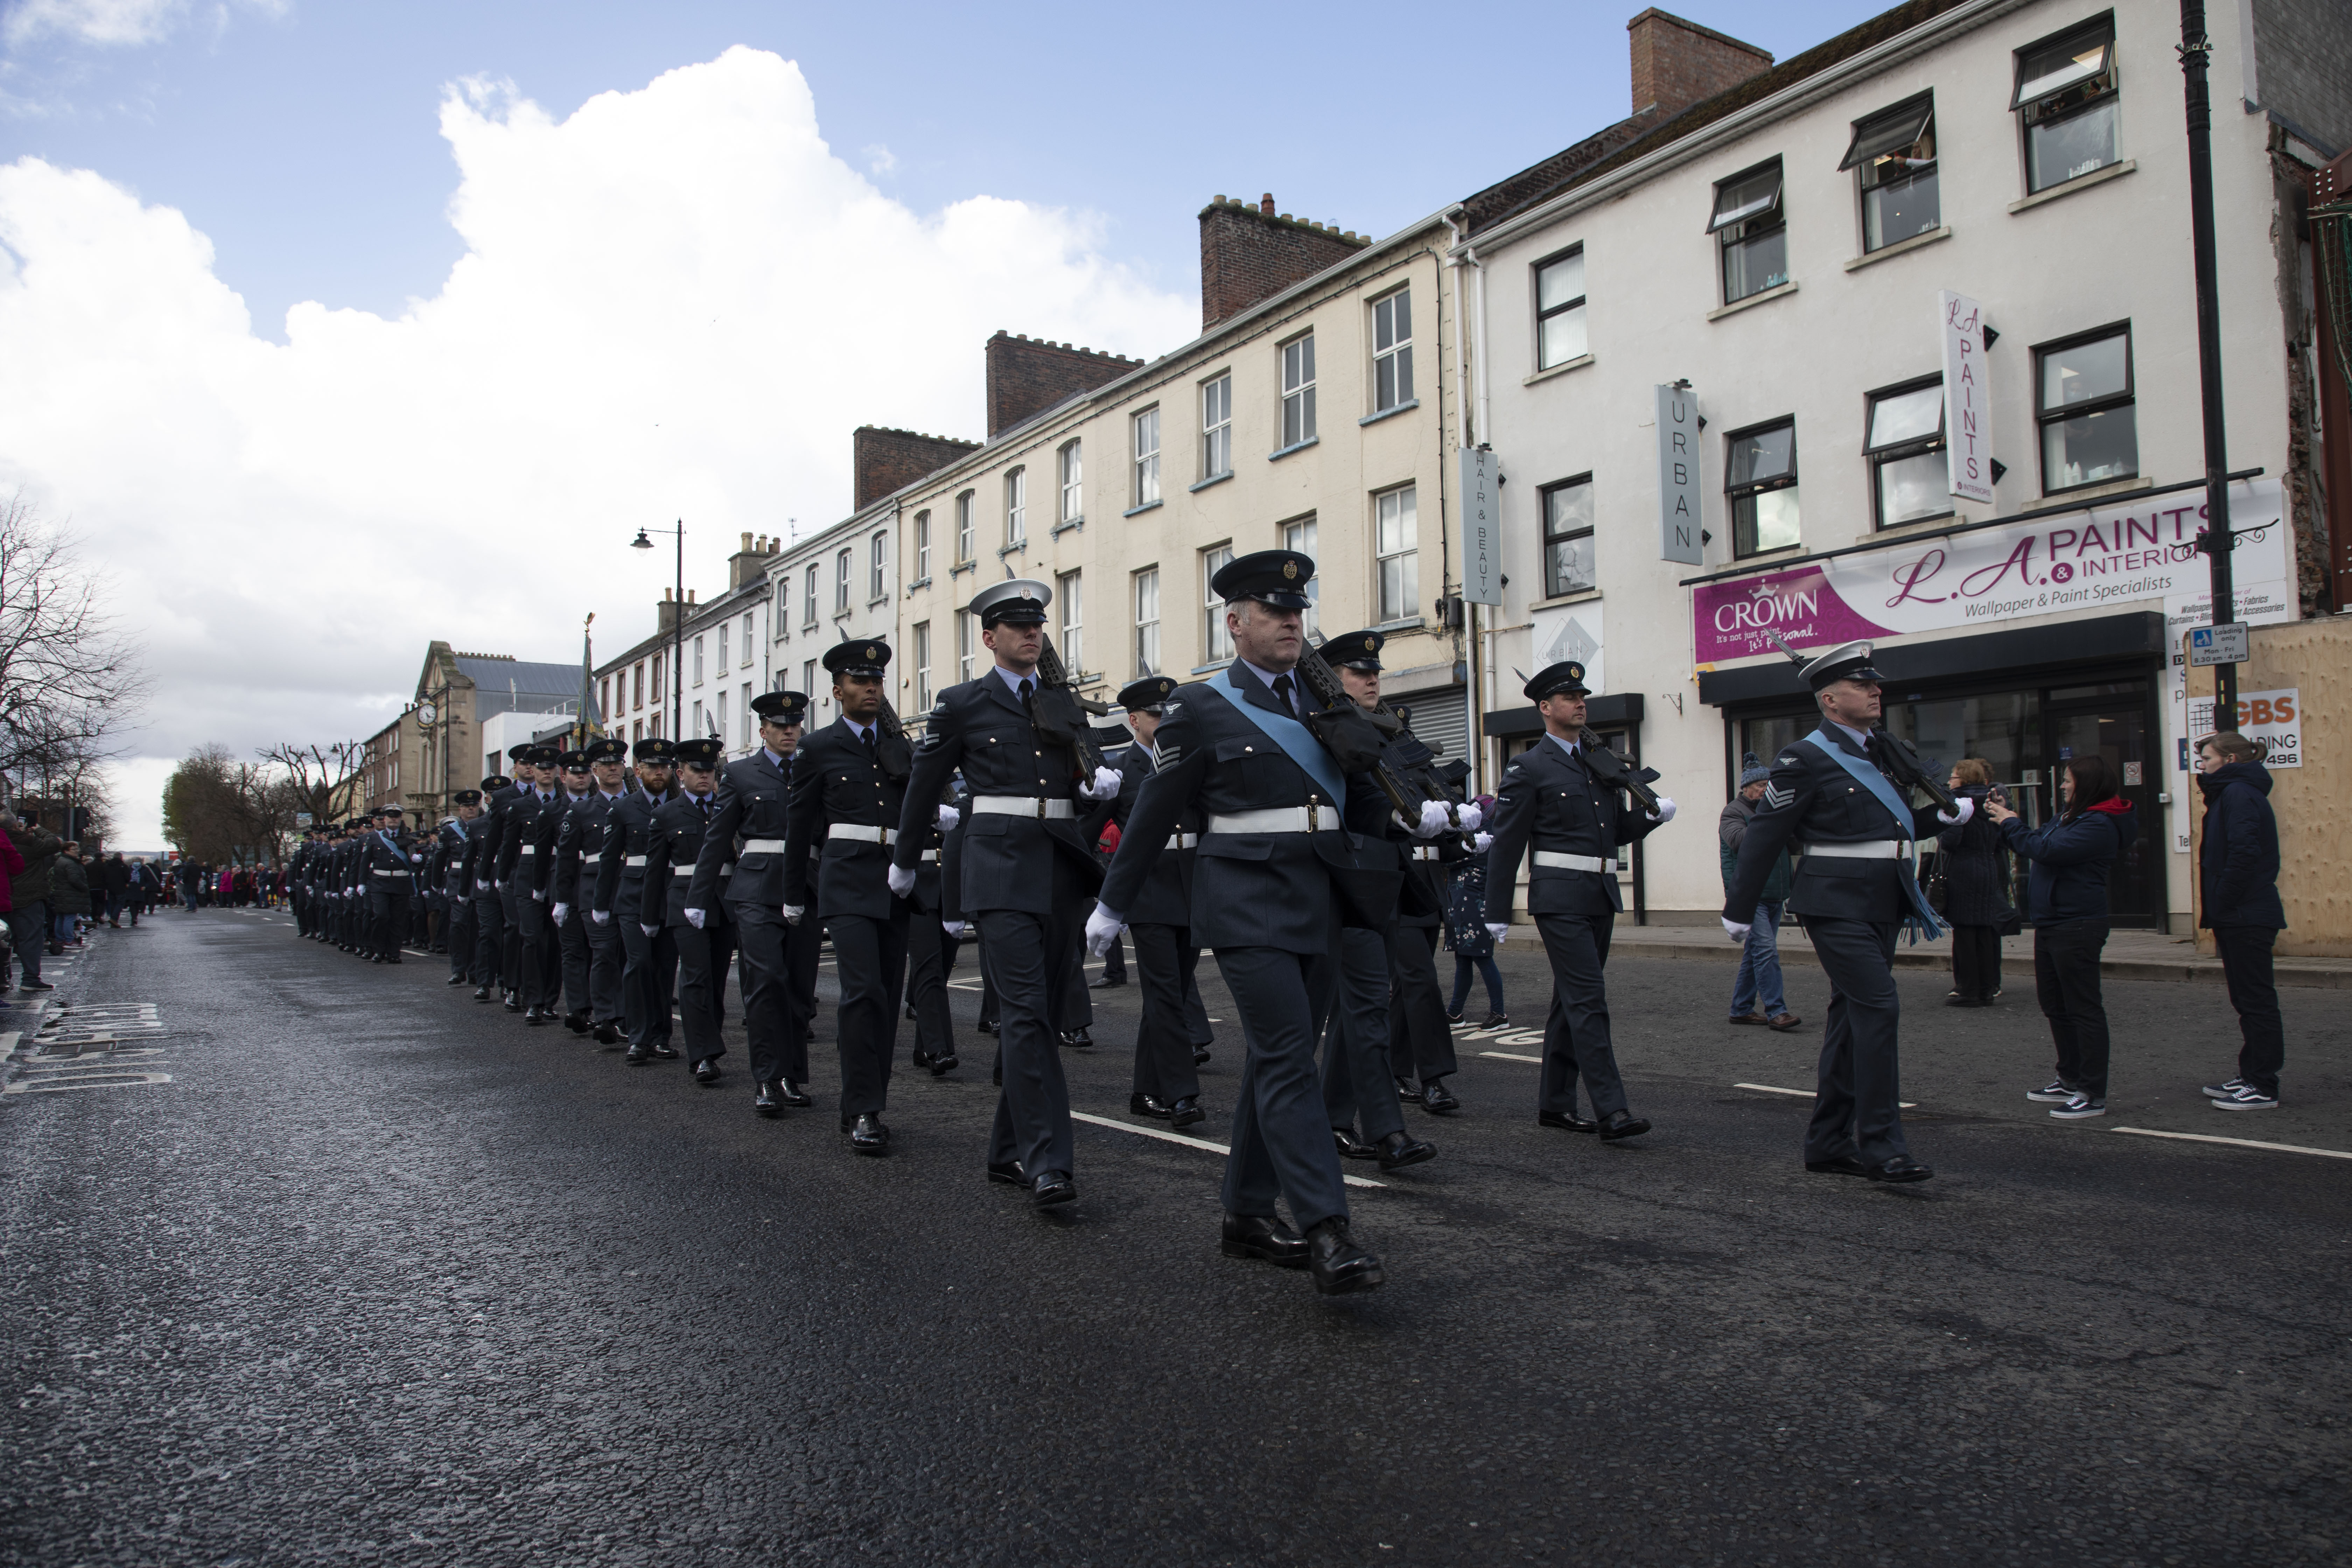 Personnel parade through streets.